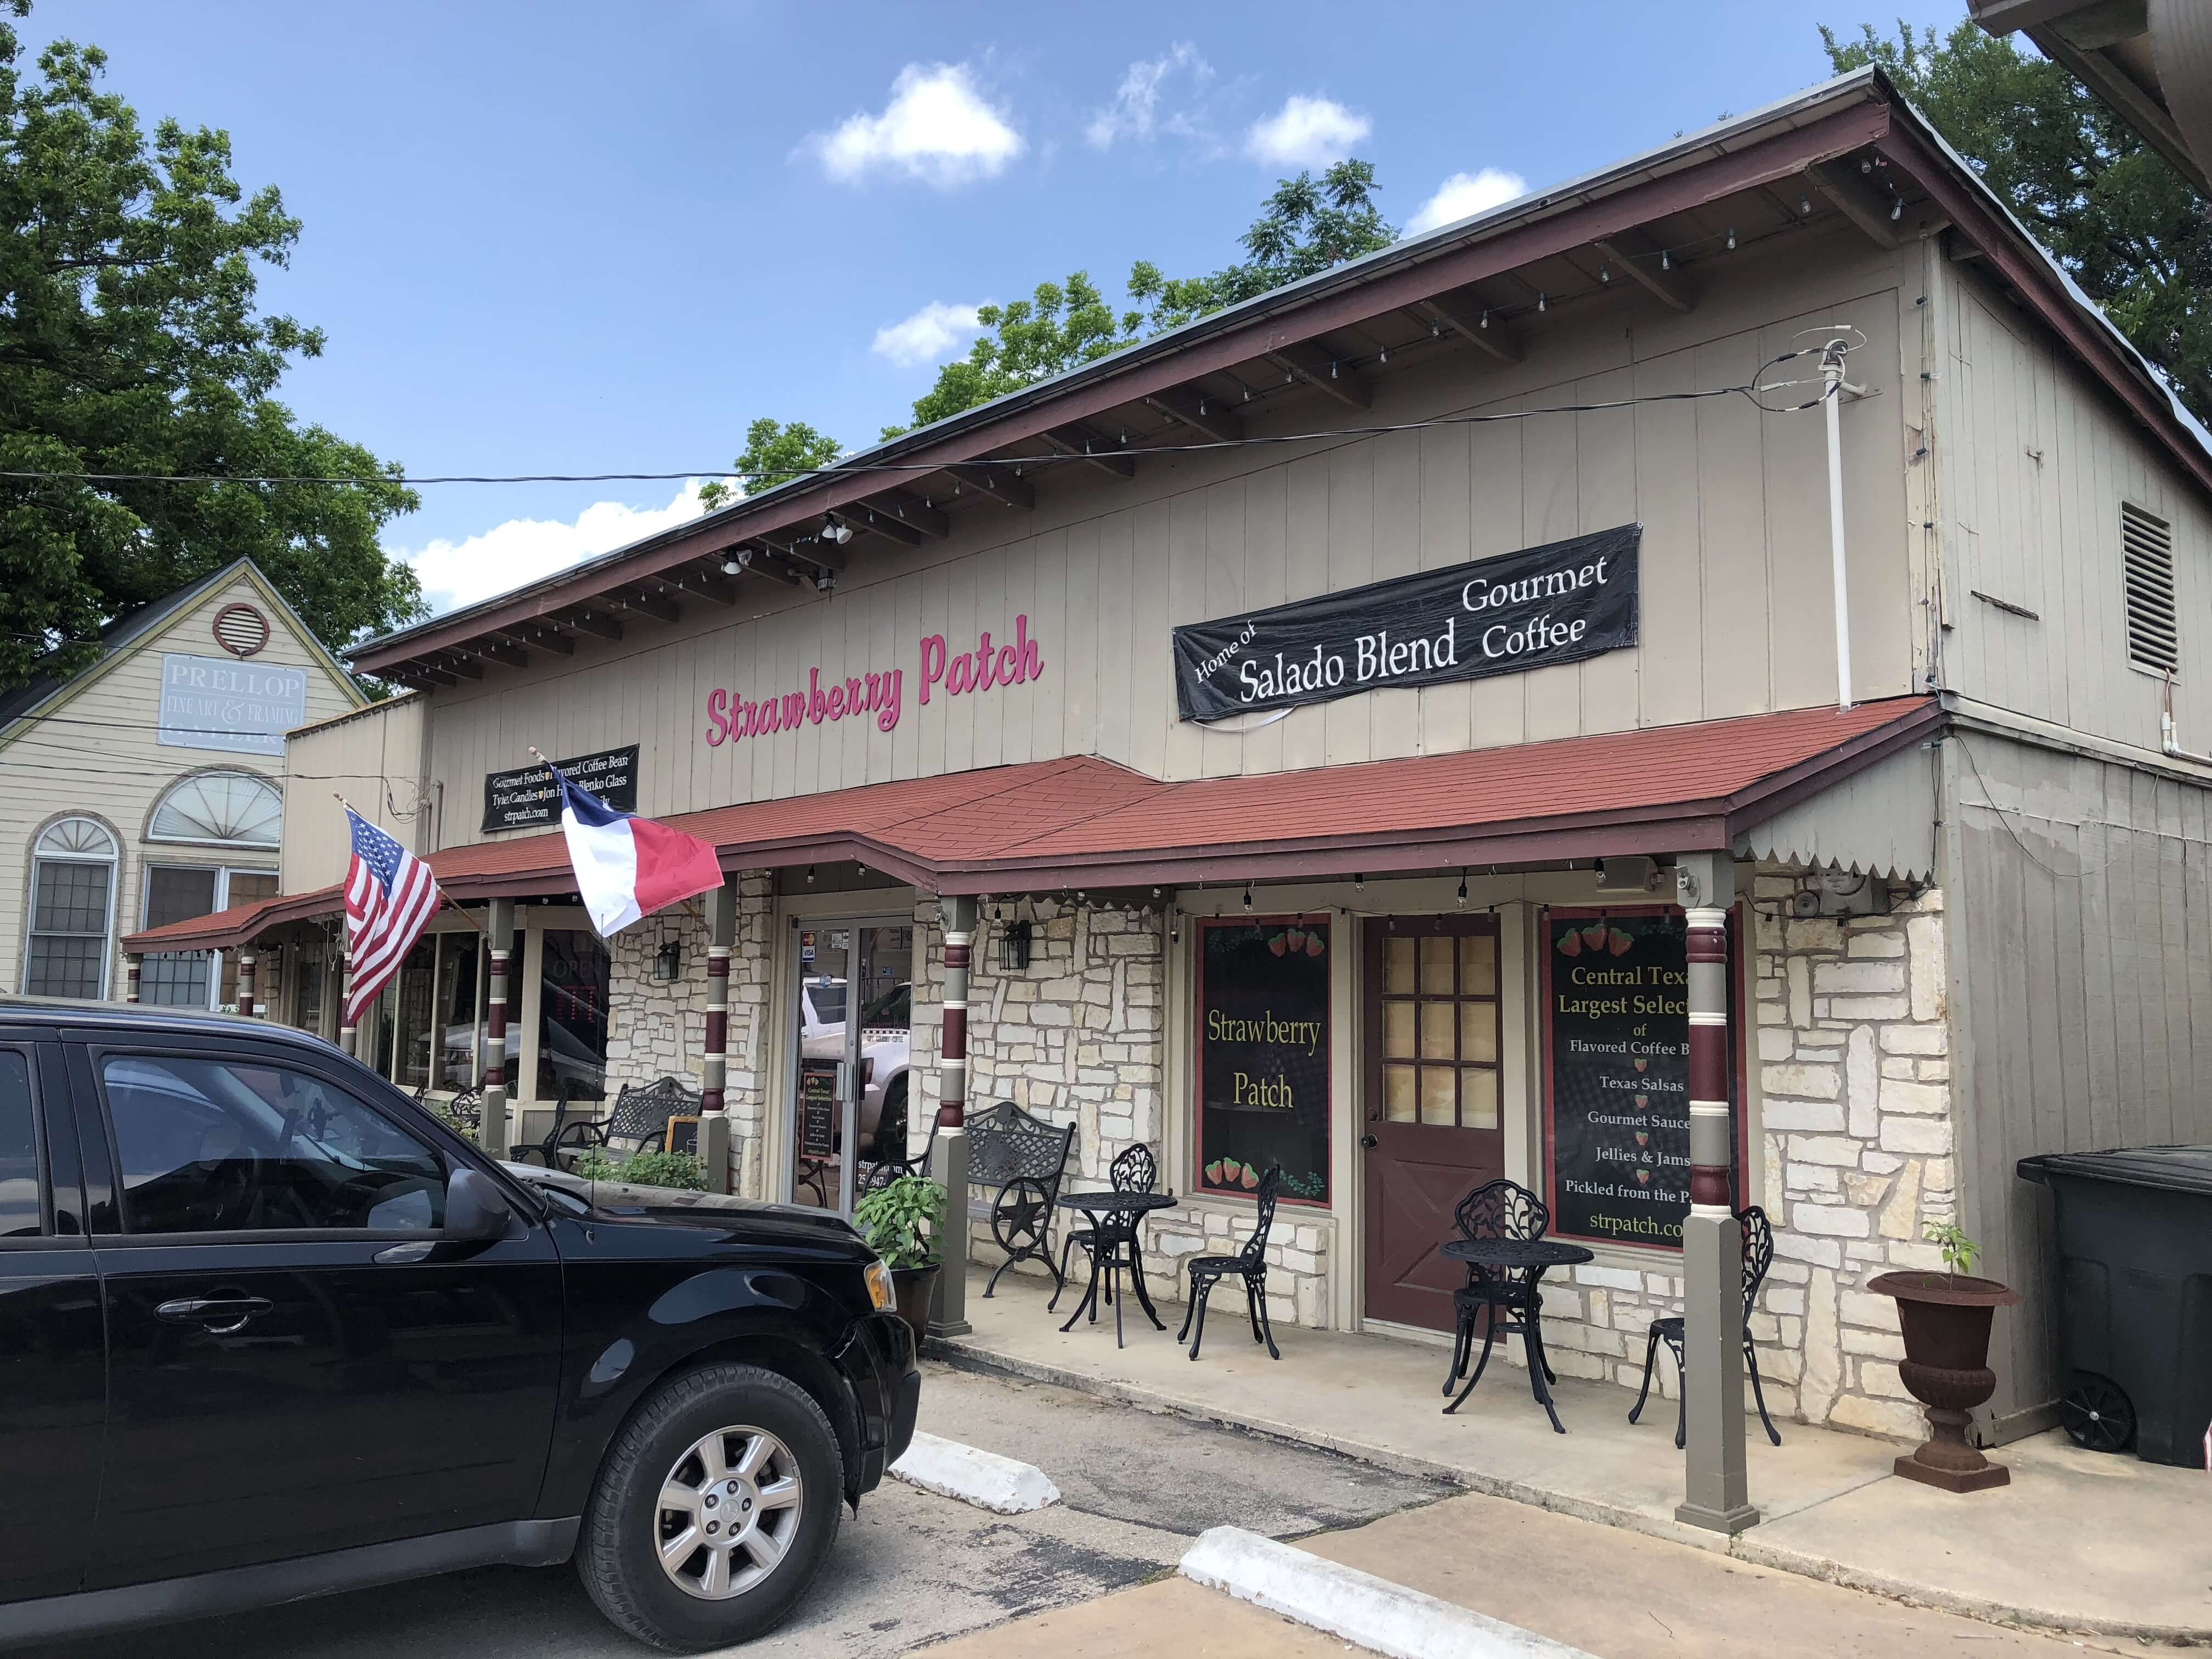 The Strawberry Patch, Salado, Texas Coffee Shop and Gift Store view of outside building